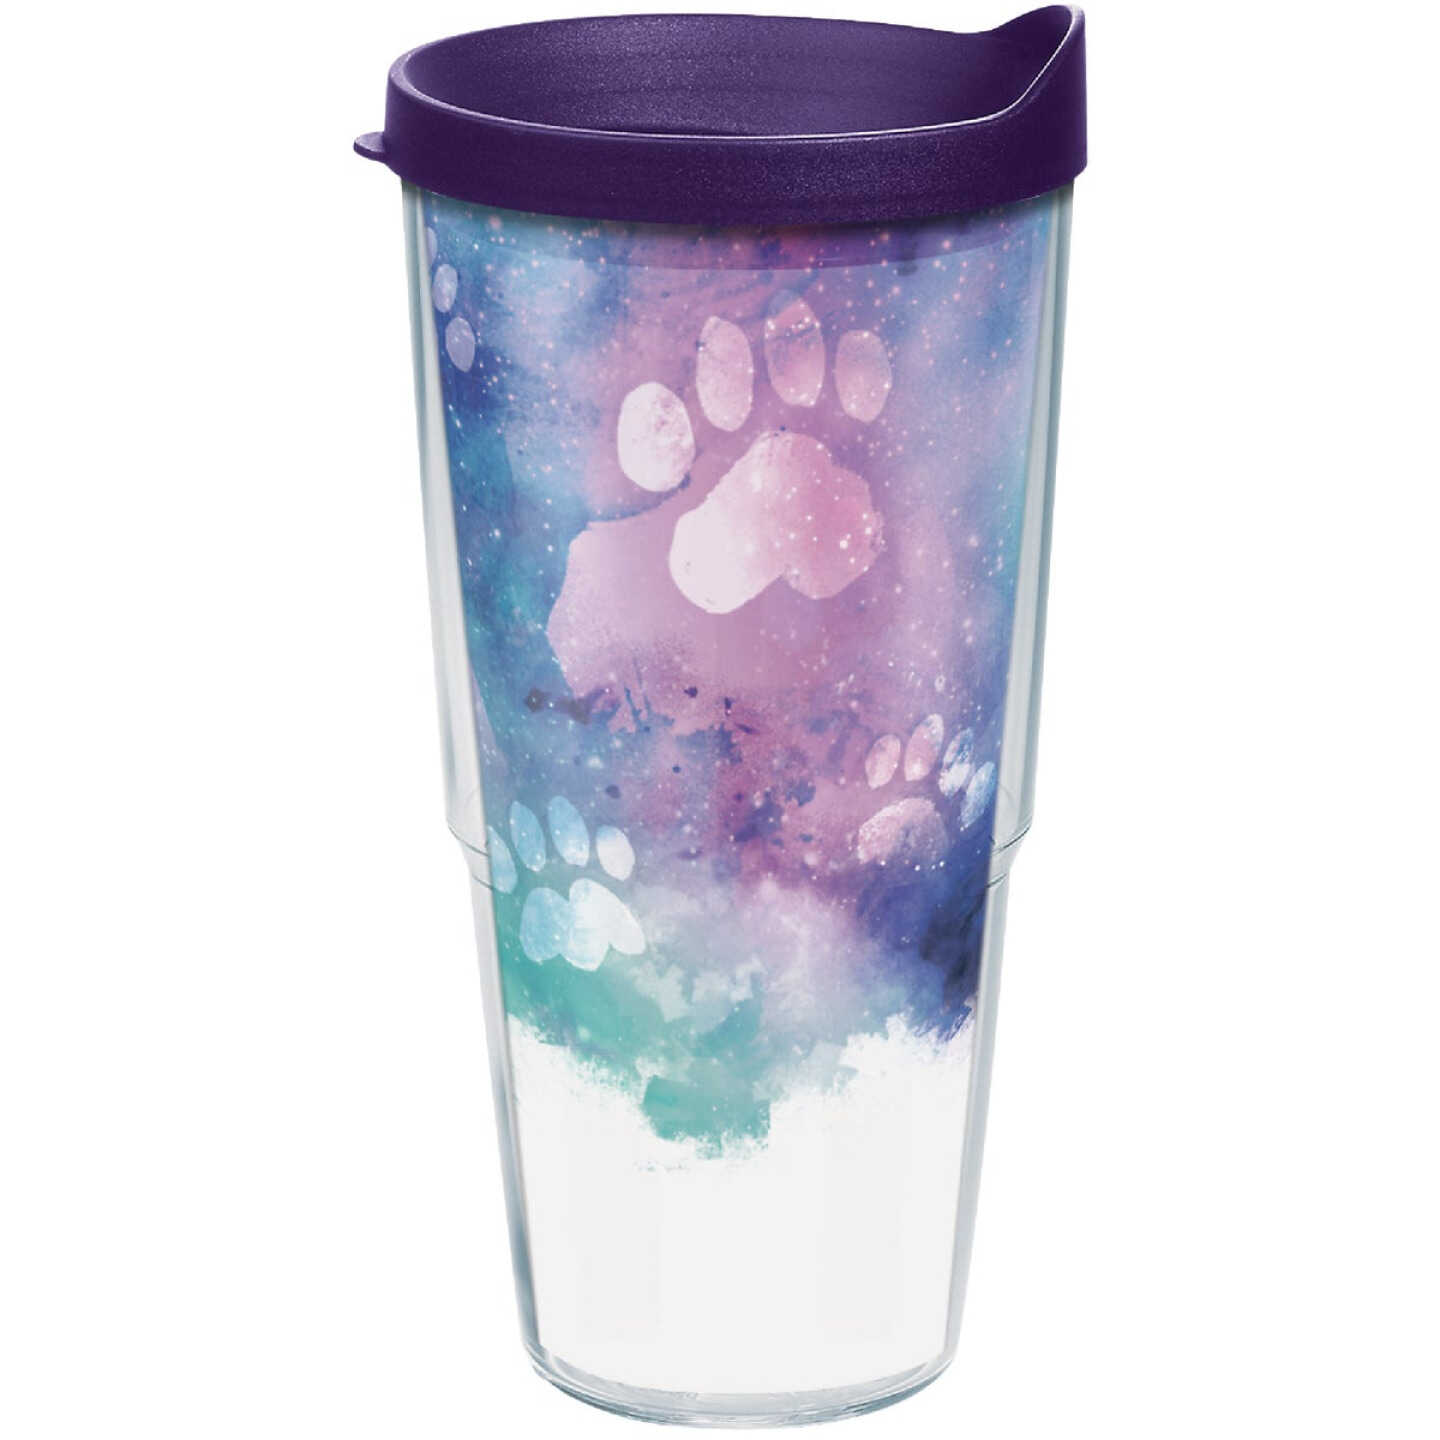 Tervis Clear & Colorful 16 Oz. Insulated Tumbler - Tahlequah Lumber